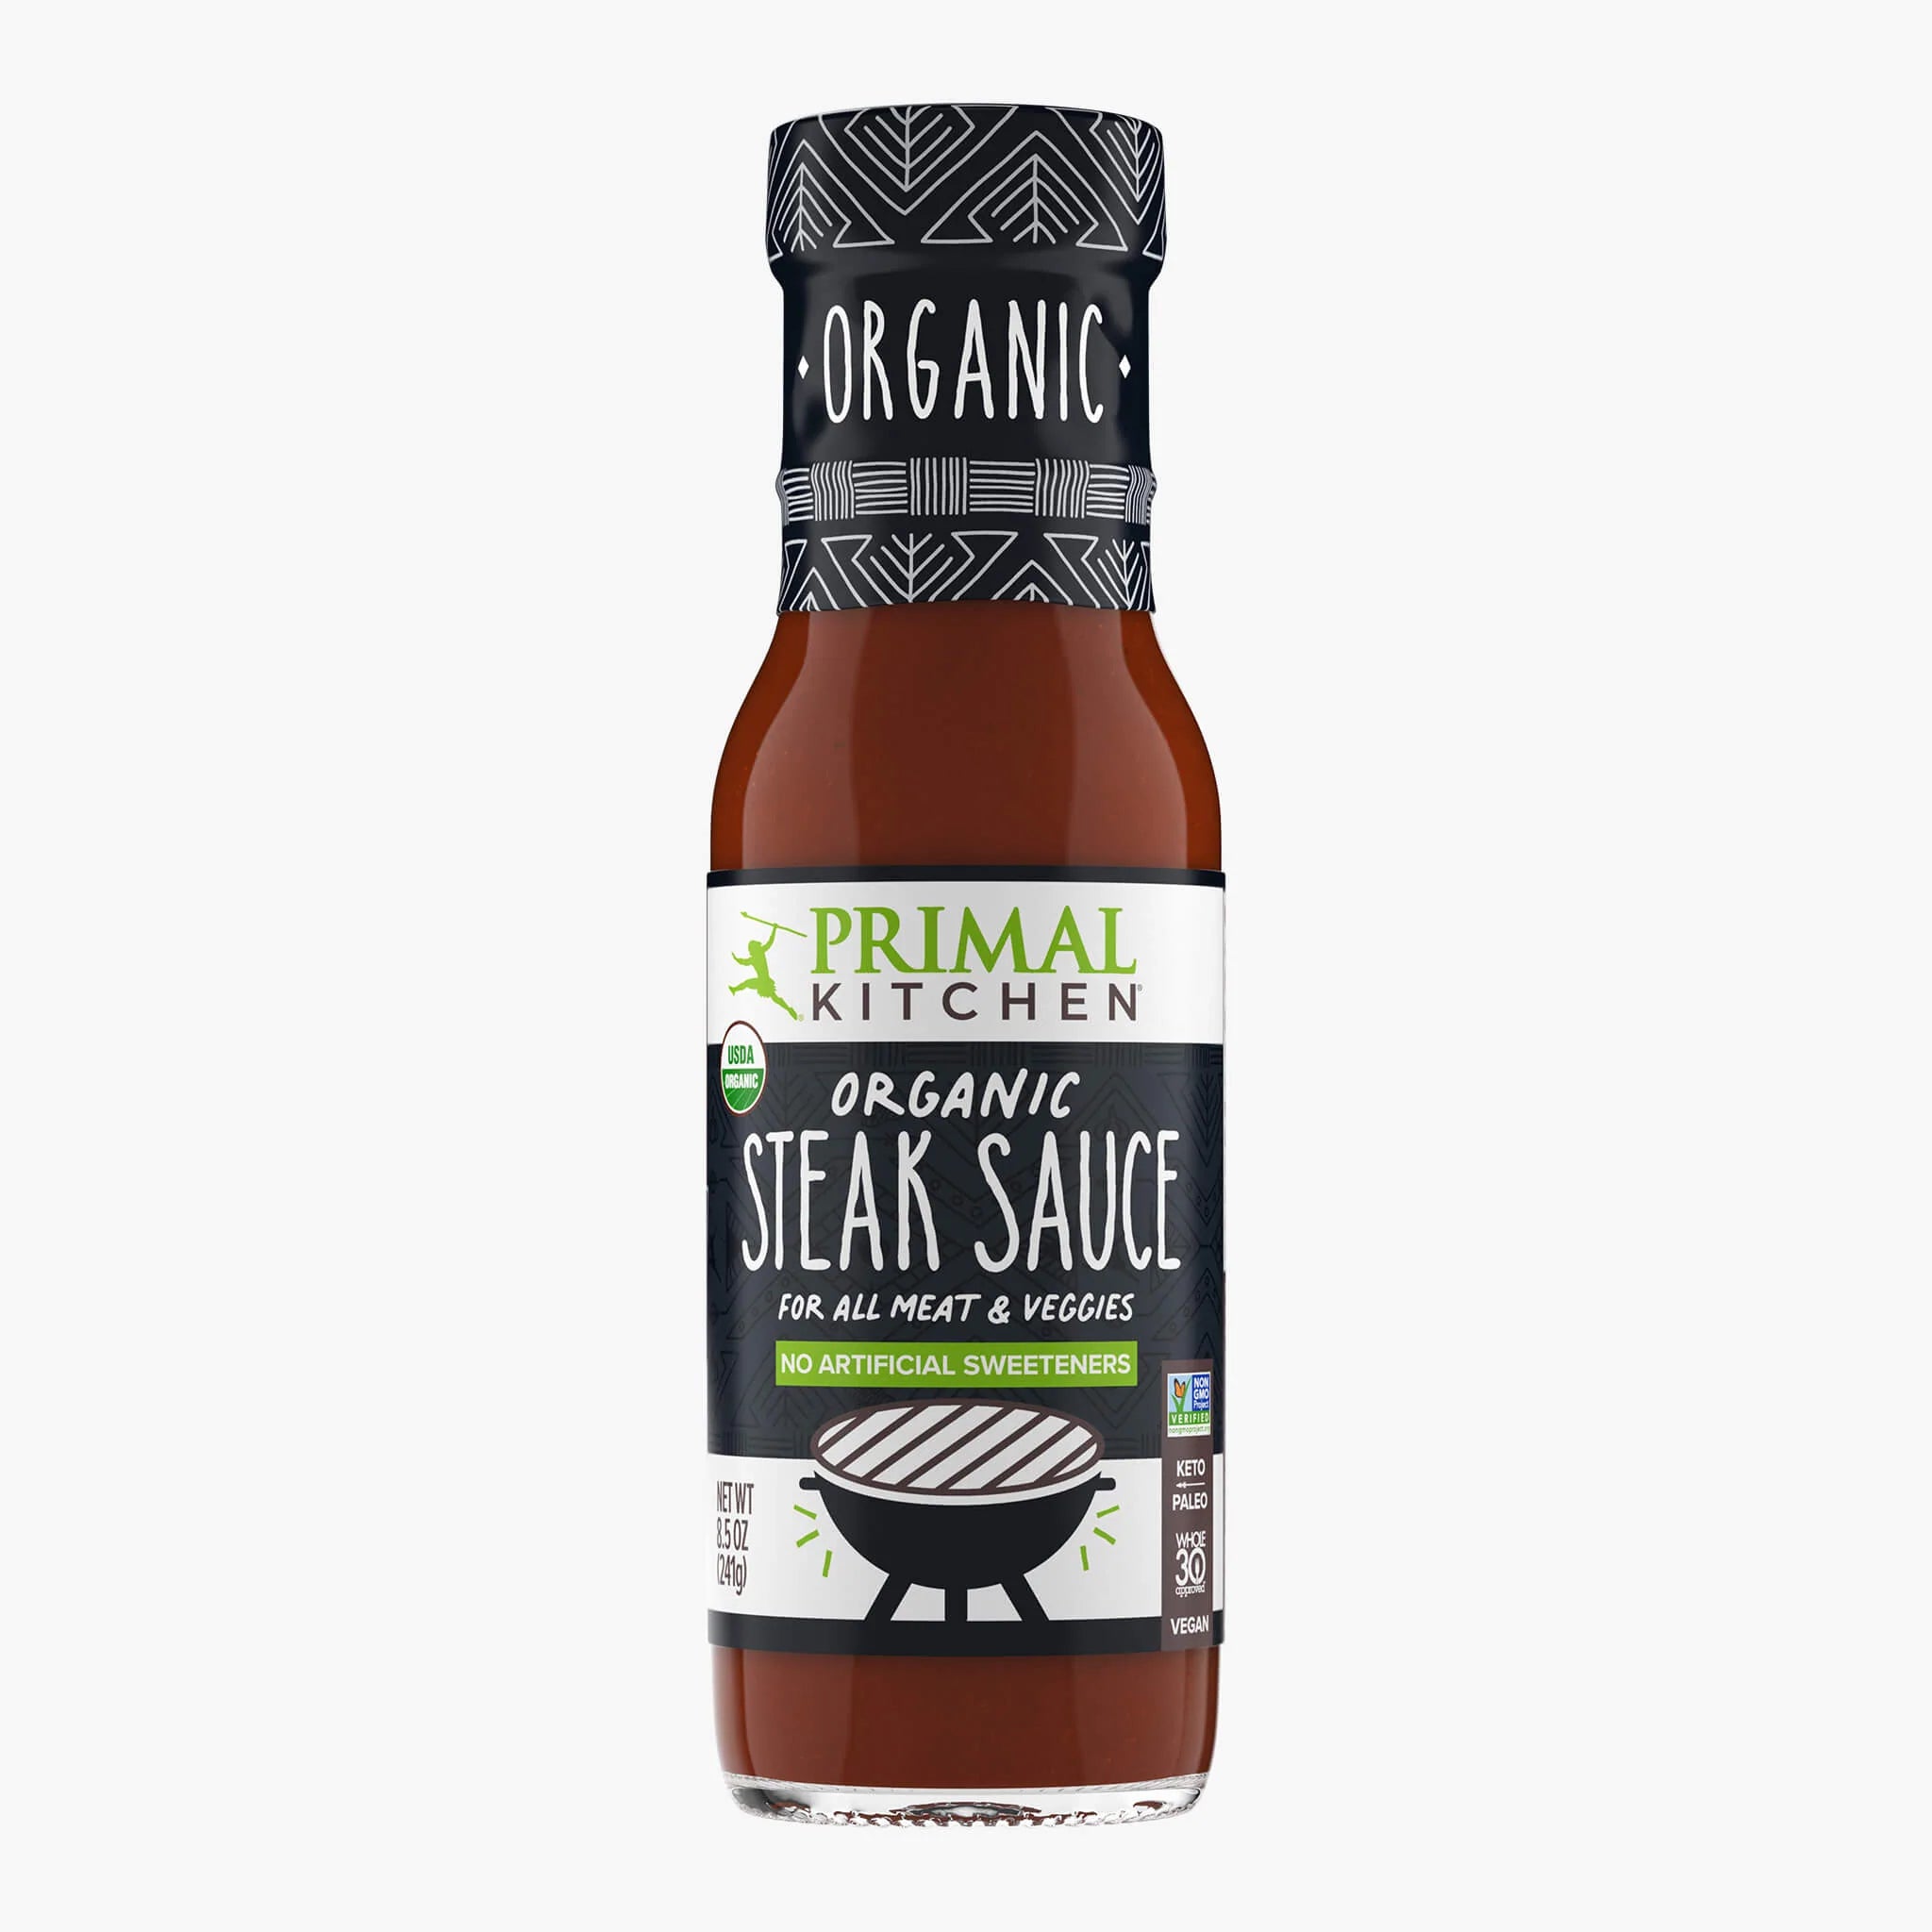 Primal Kitchen Classic BBQ Sauce Organic And Unsweetened 8.5 oz 241g New  Sealed